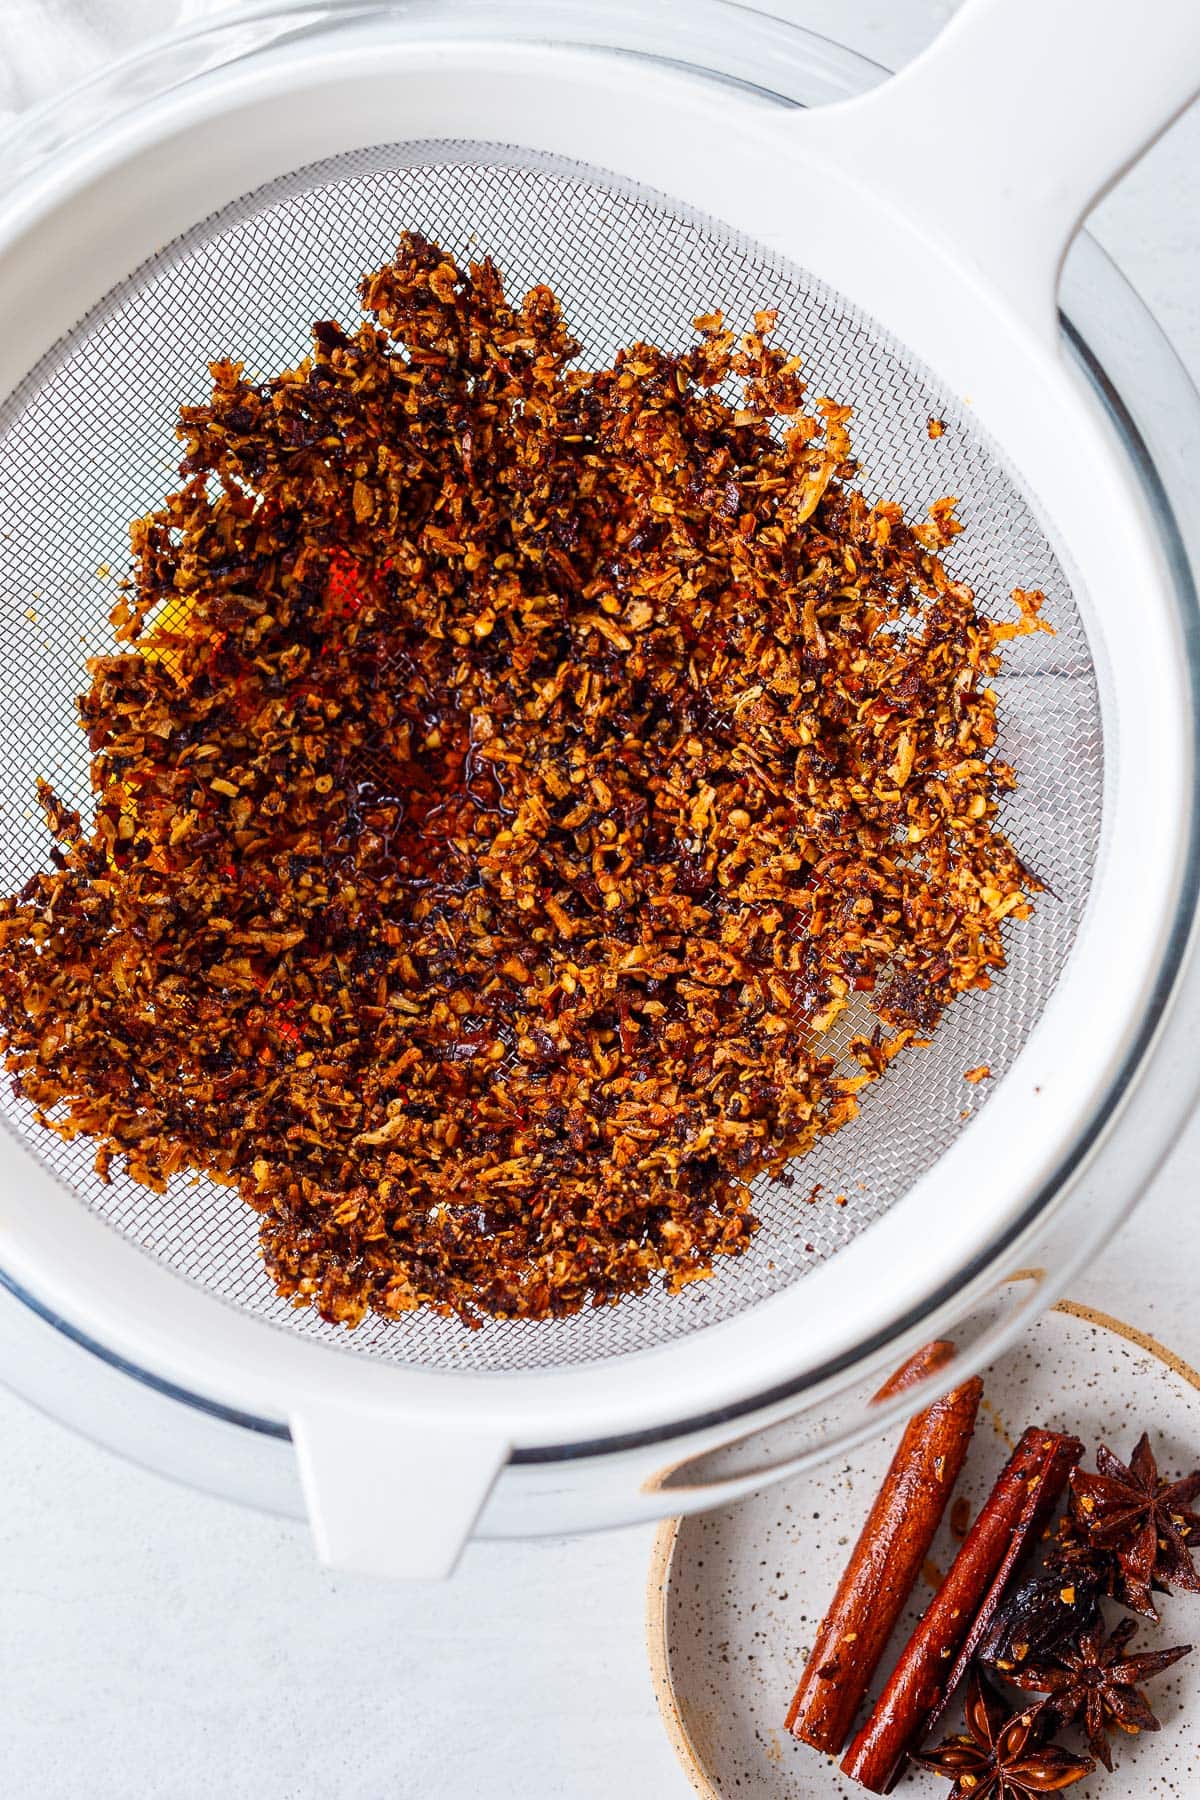 chili crisp spread out in strainer drying